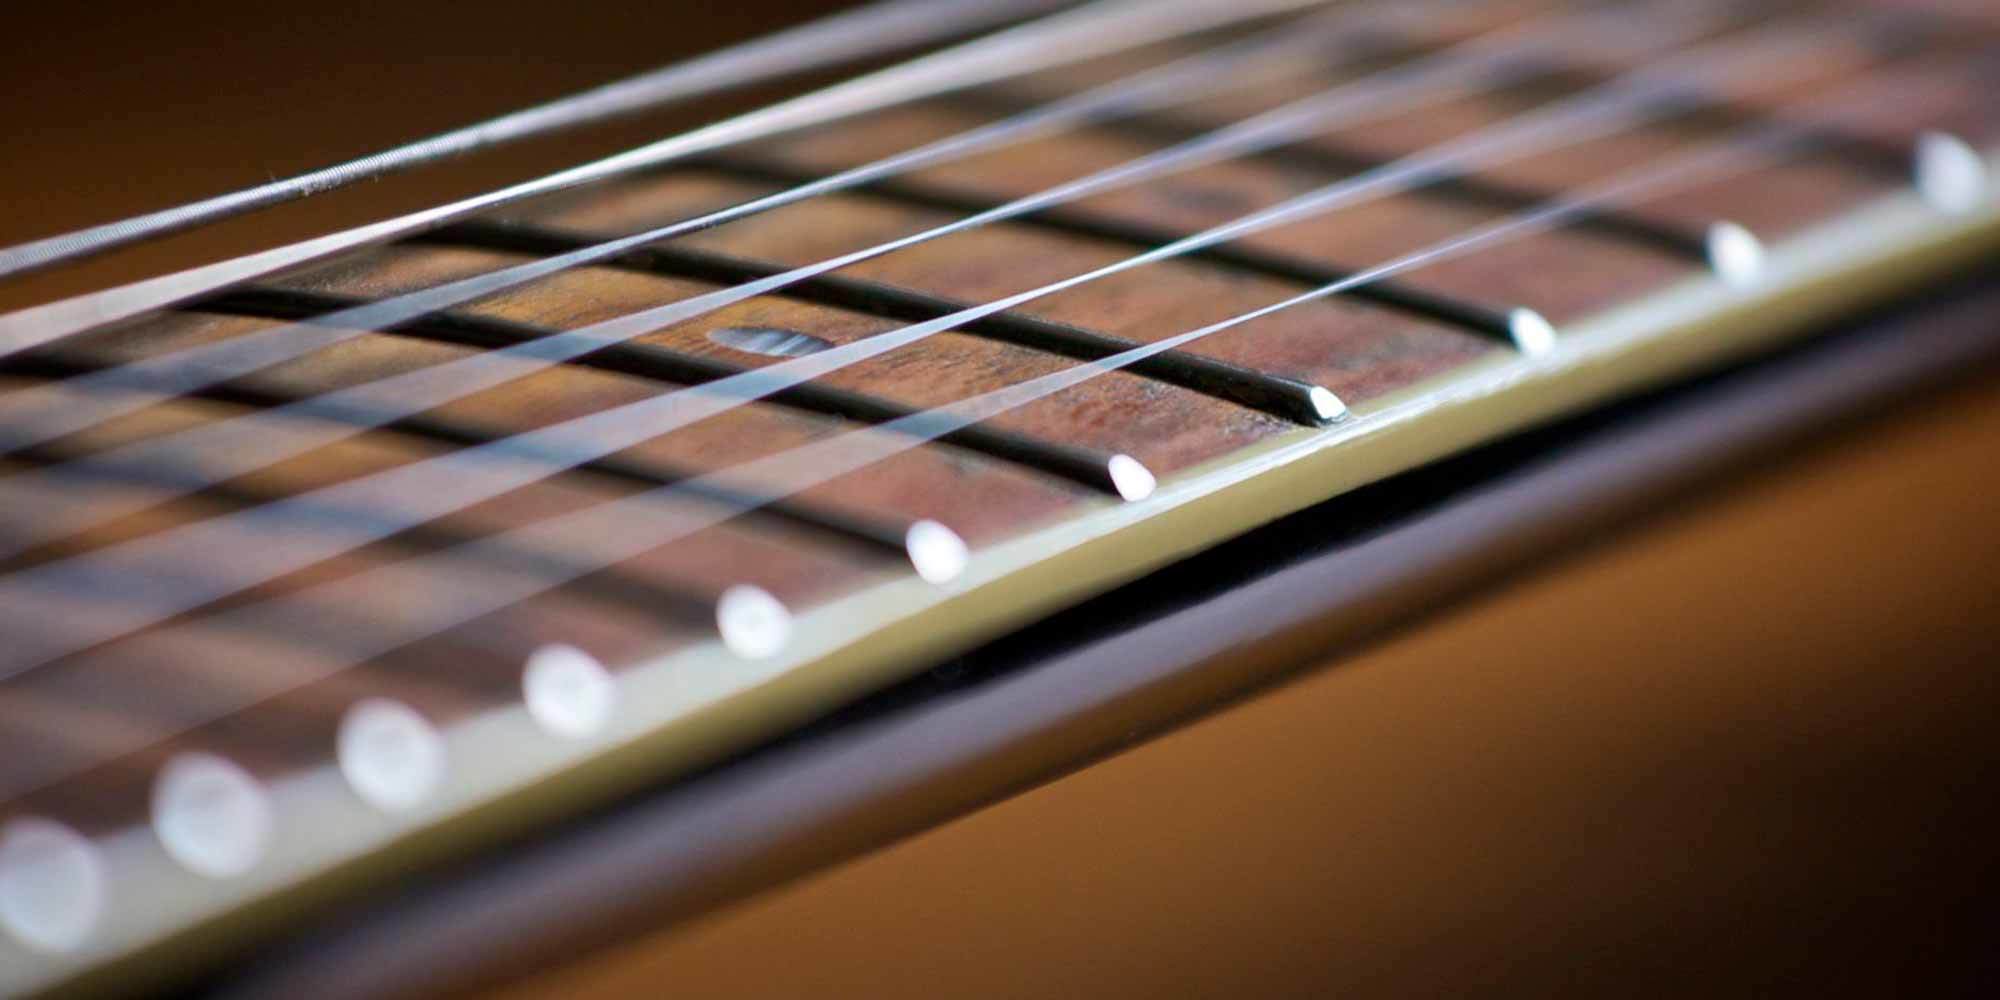 Guitar Strings: Materials, Construction and Benefits | Reverb News